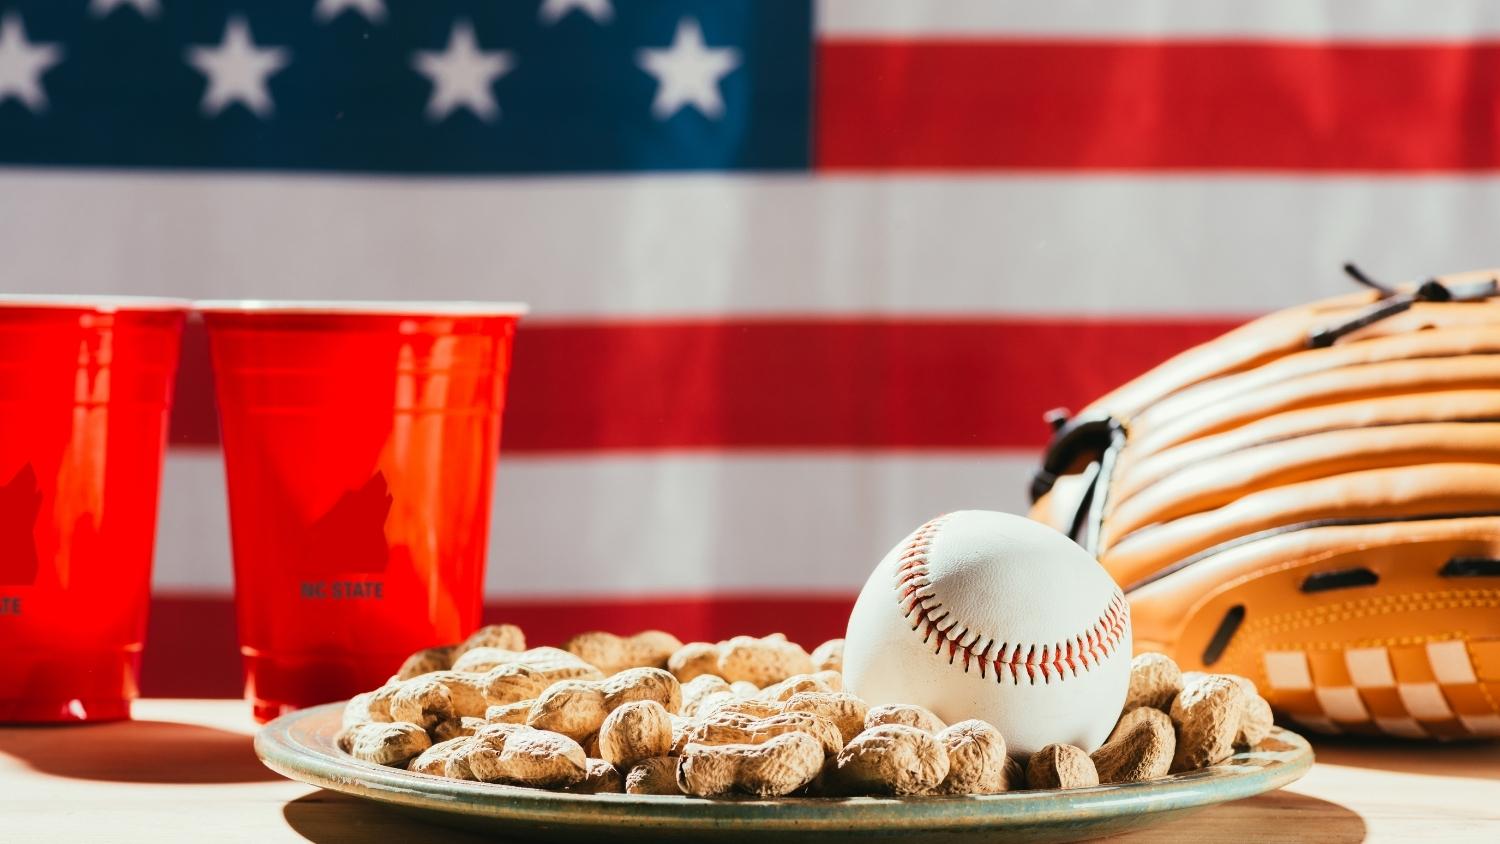 In-shell peanuts on a plate with a baseball